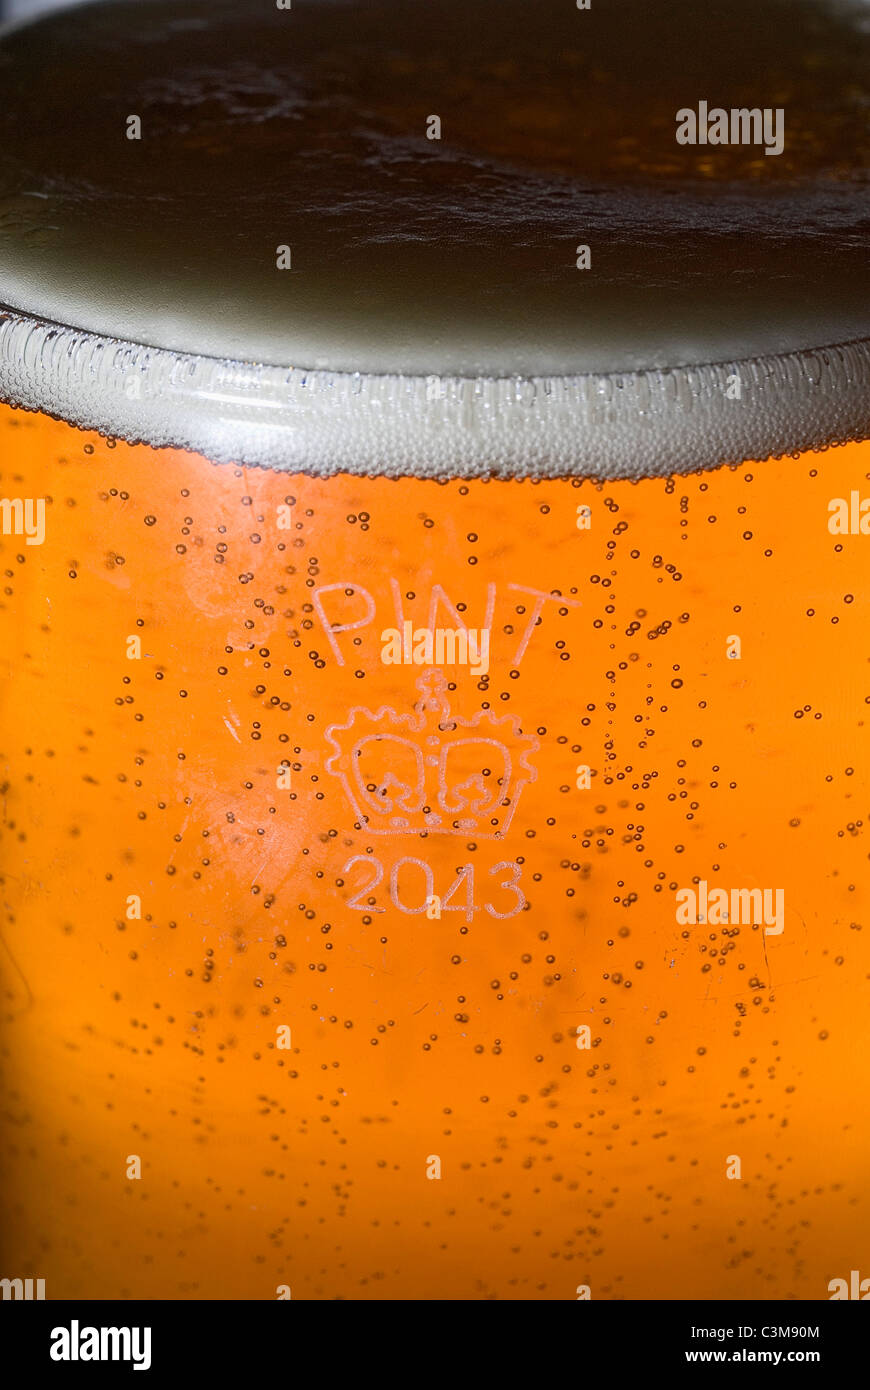 UK PINT BEER GLASS WITH CROWN STAMP Stock Photo